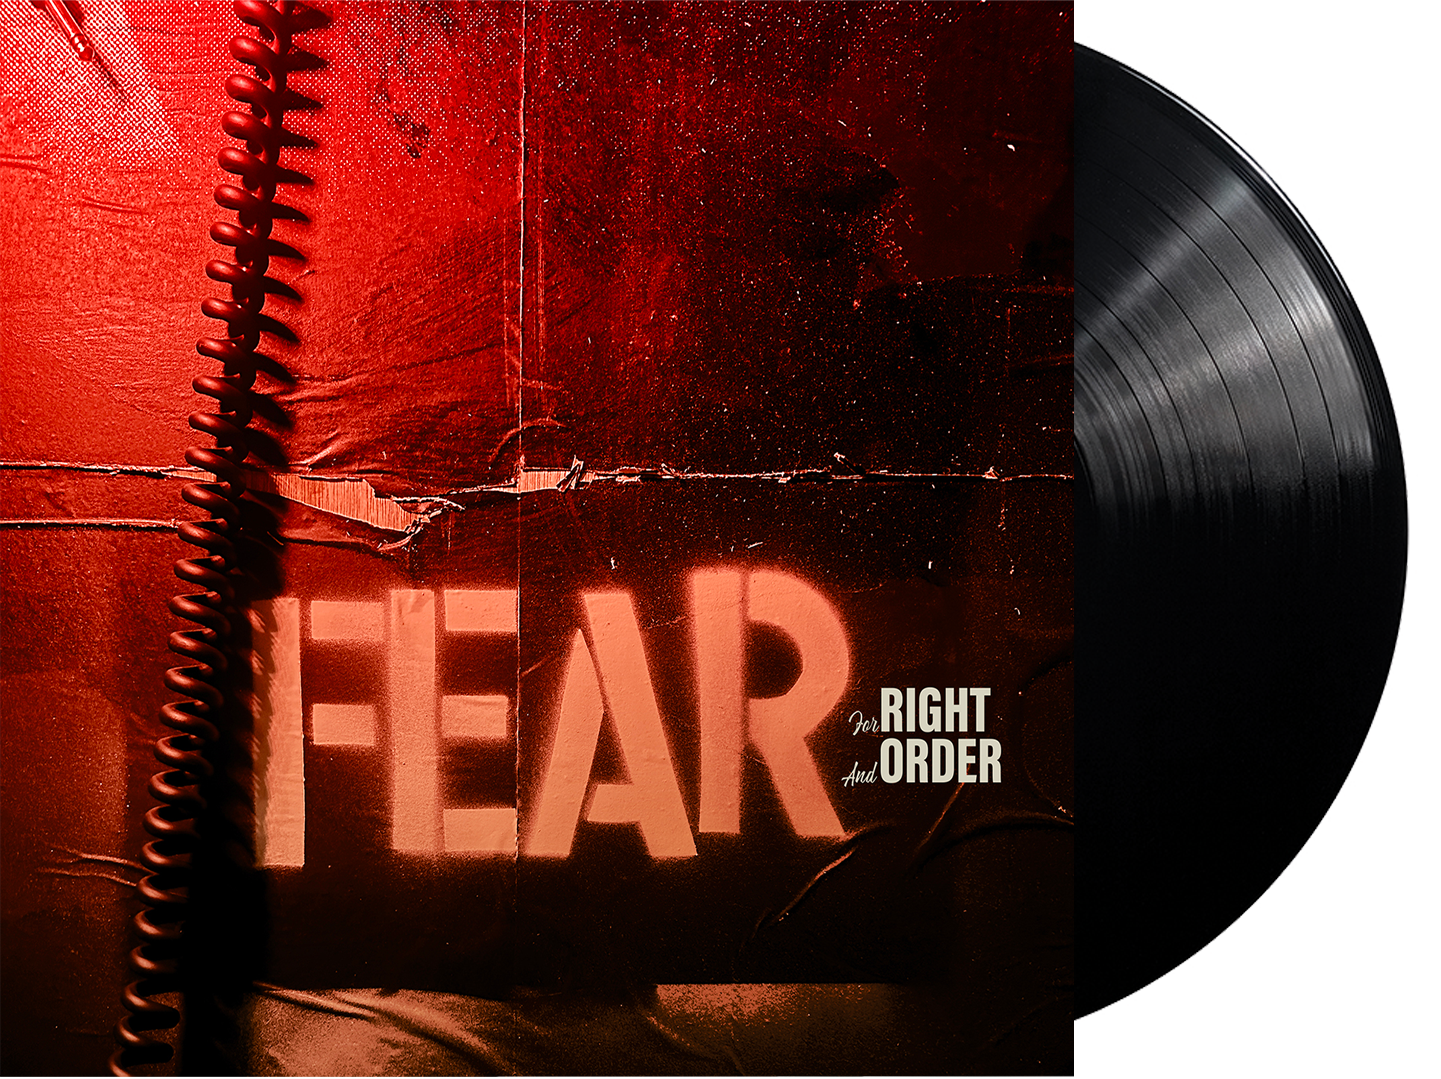 FEAR "FOR RIGHT AND ORDER" STANDARD EDITION BLACK VINYL LP - PRE ORDER